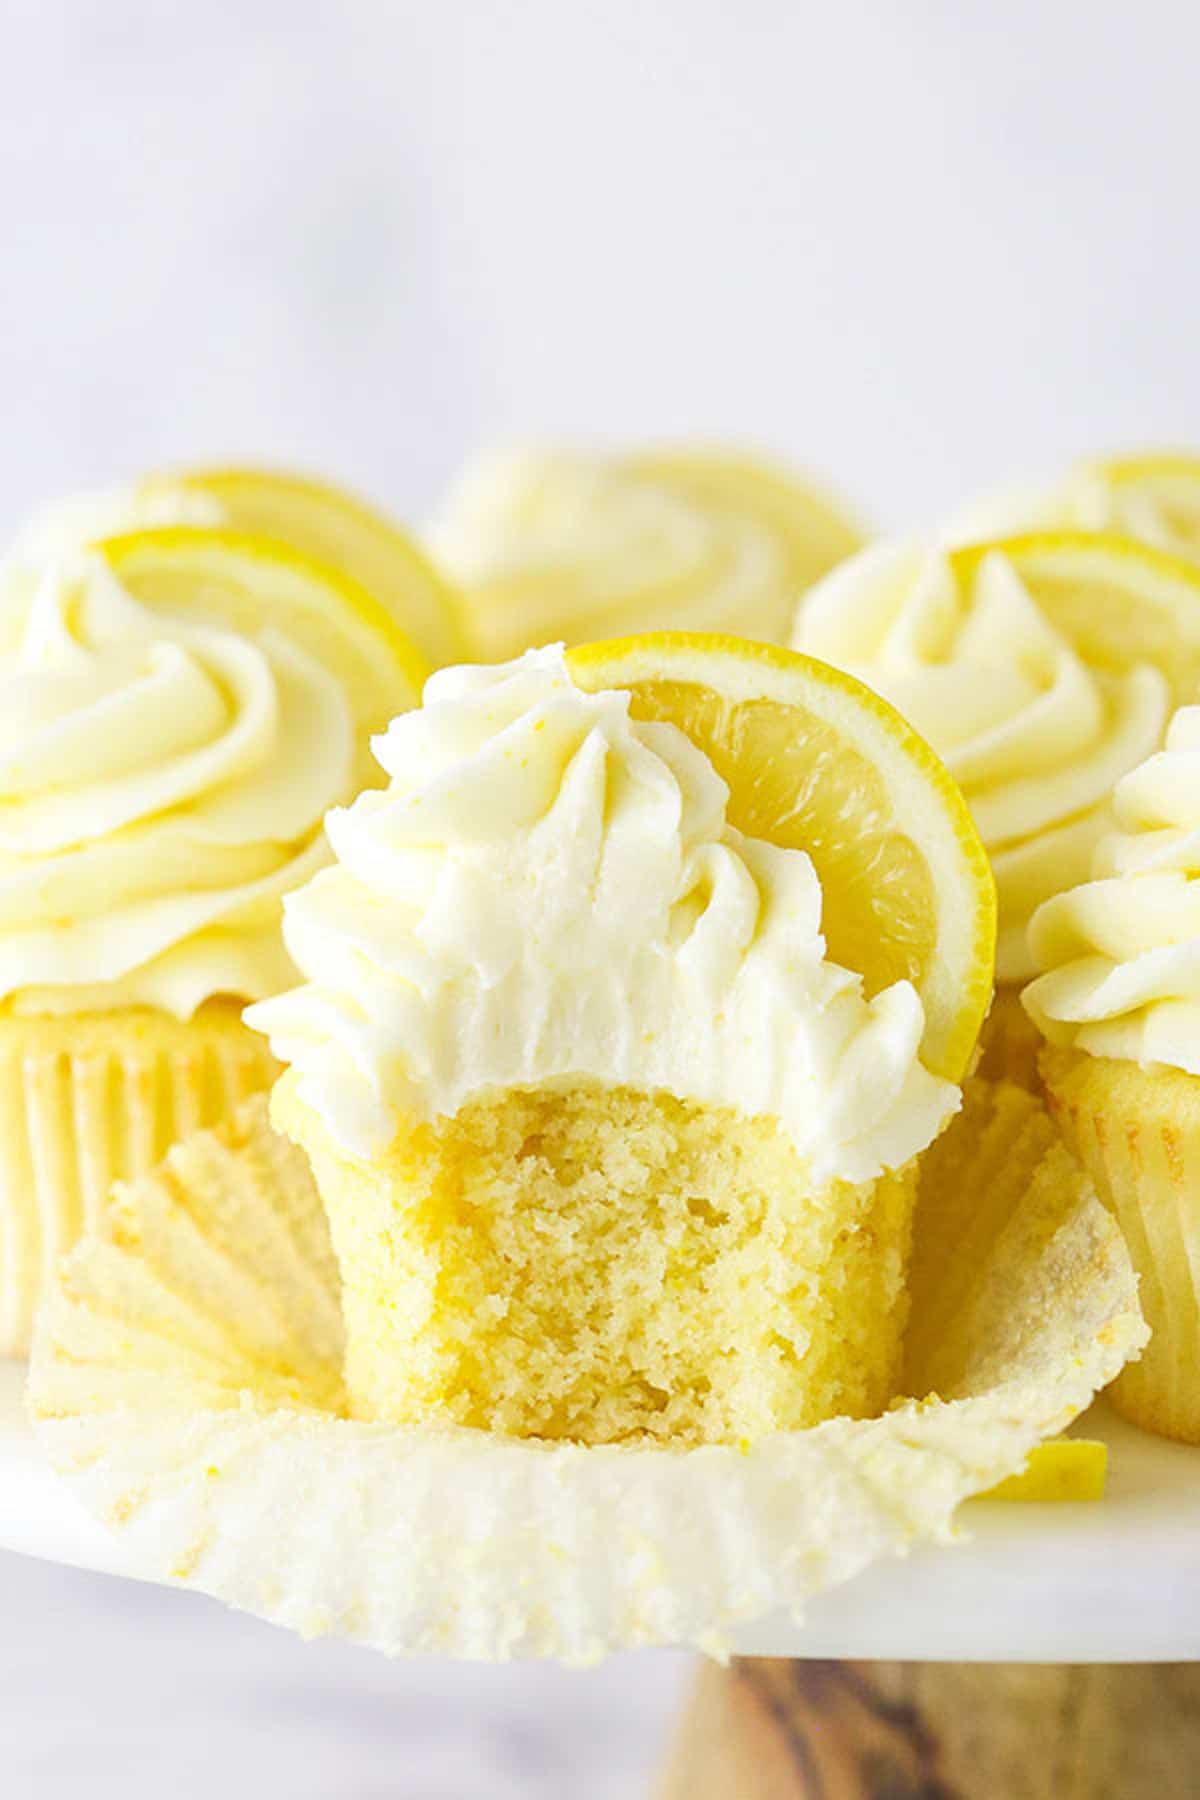 A Frosted Lemon Cupcake with One Bite Taken Out